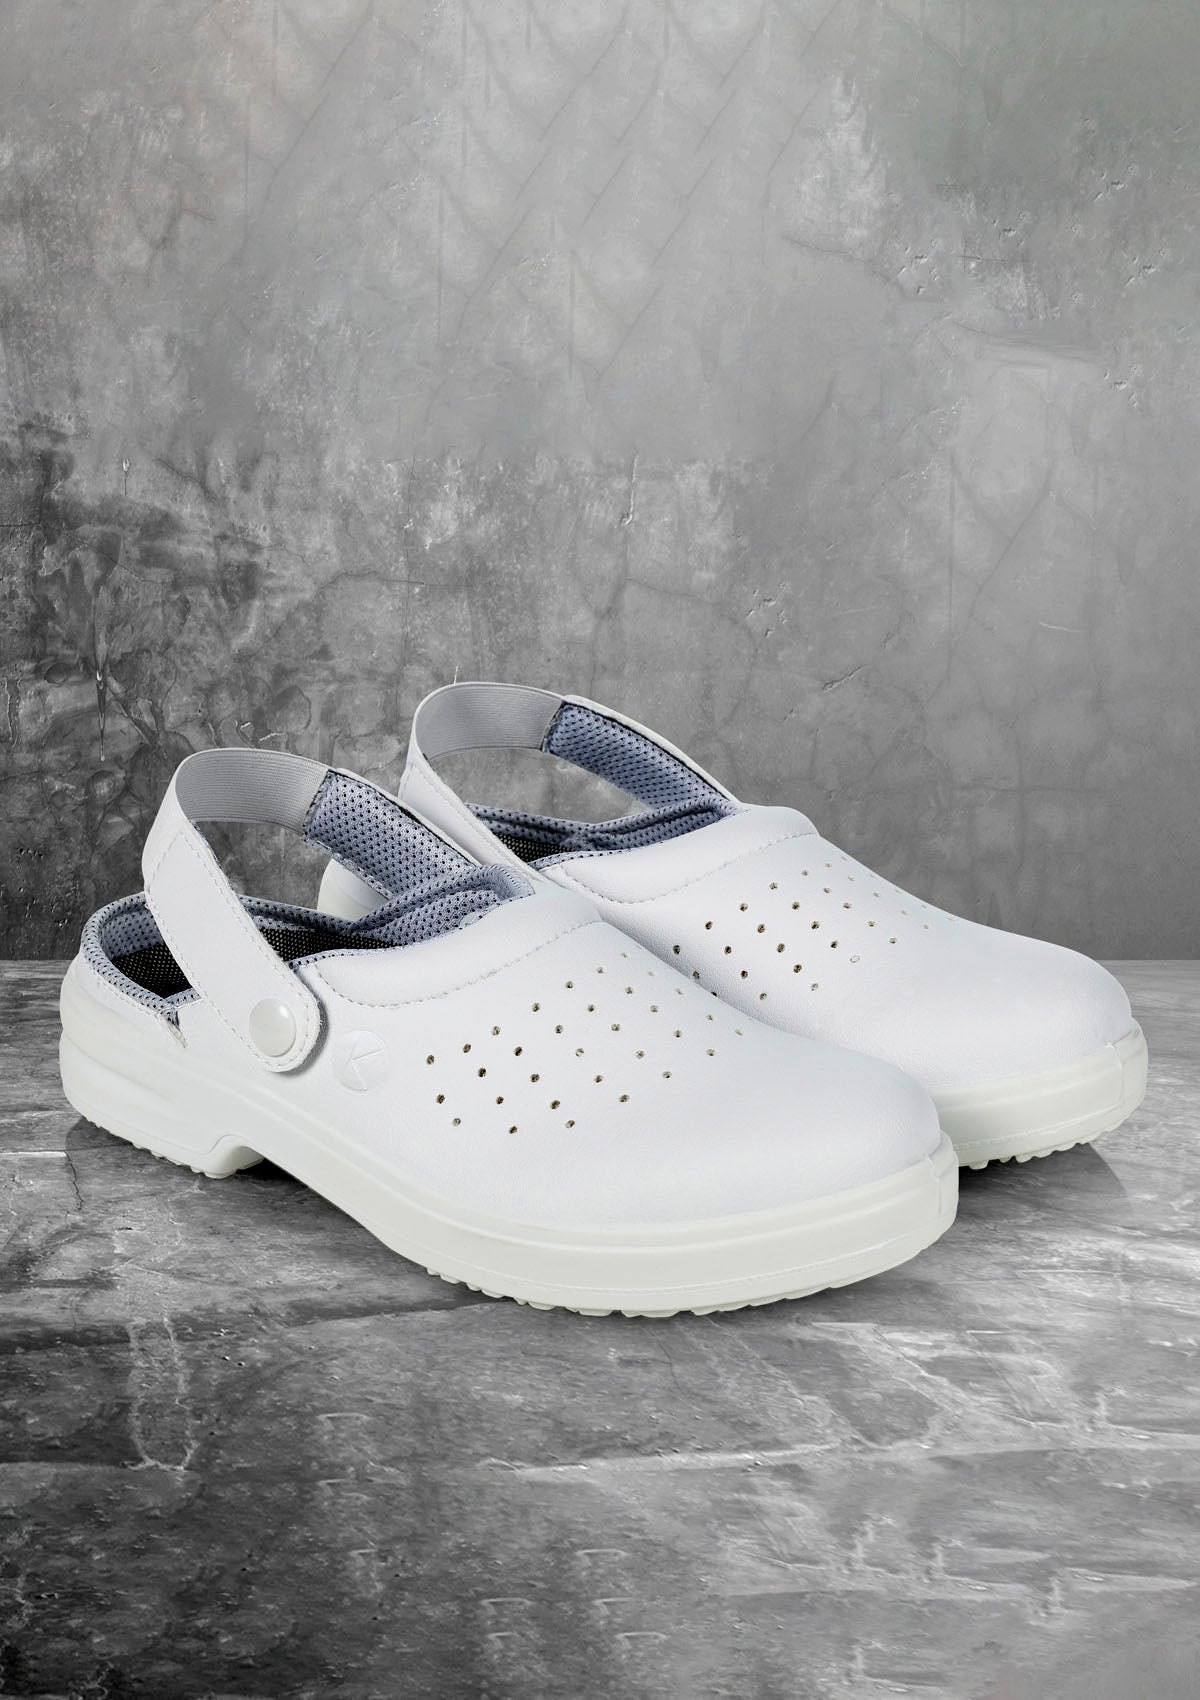 Unisex Chef Safety Clogs Oxford